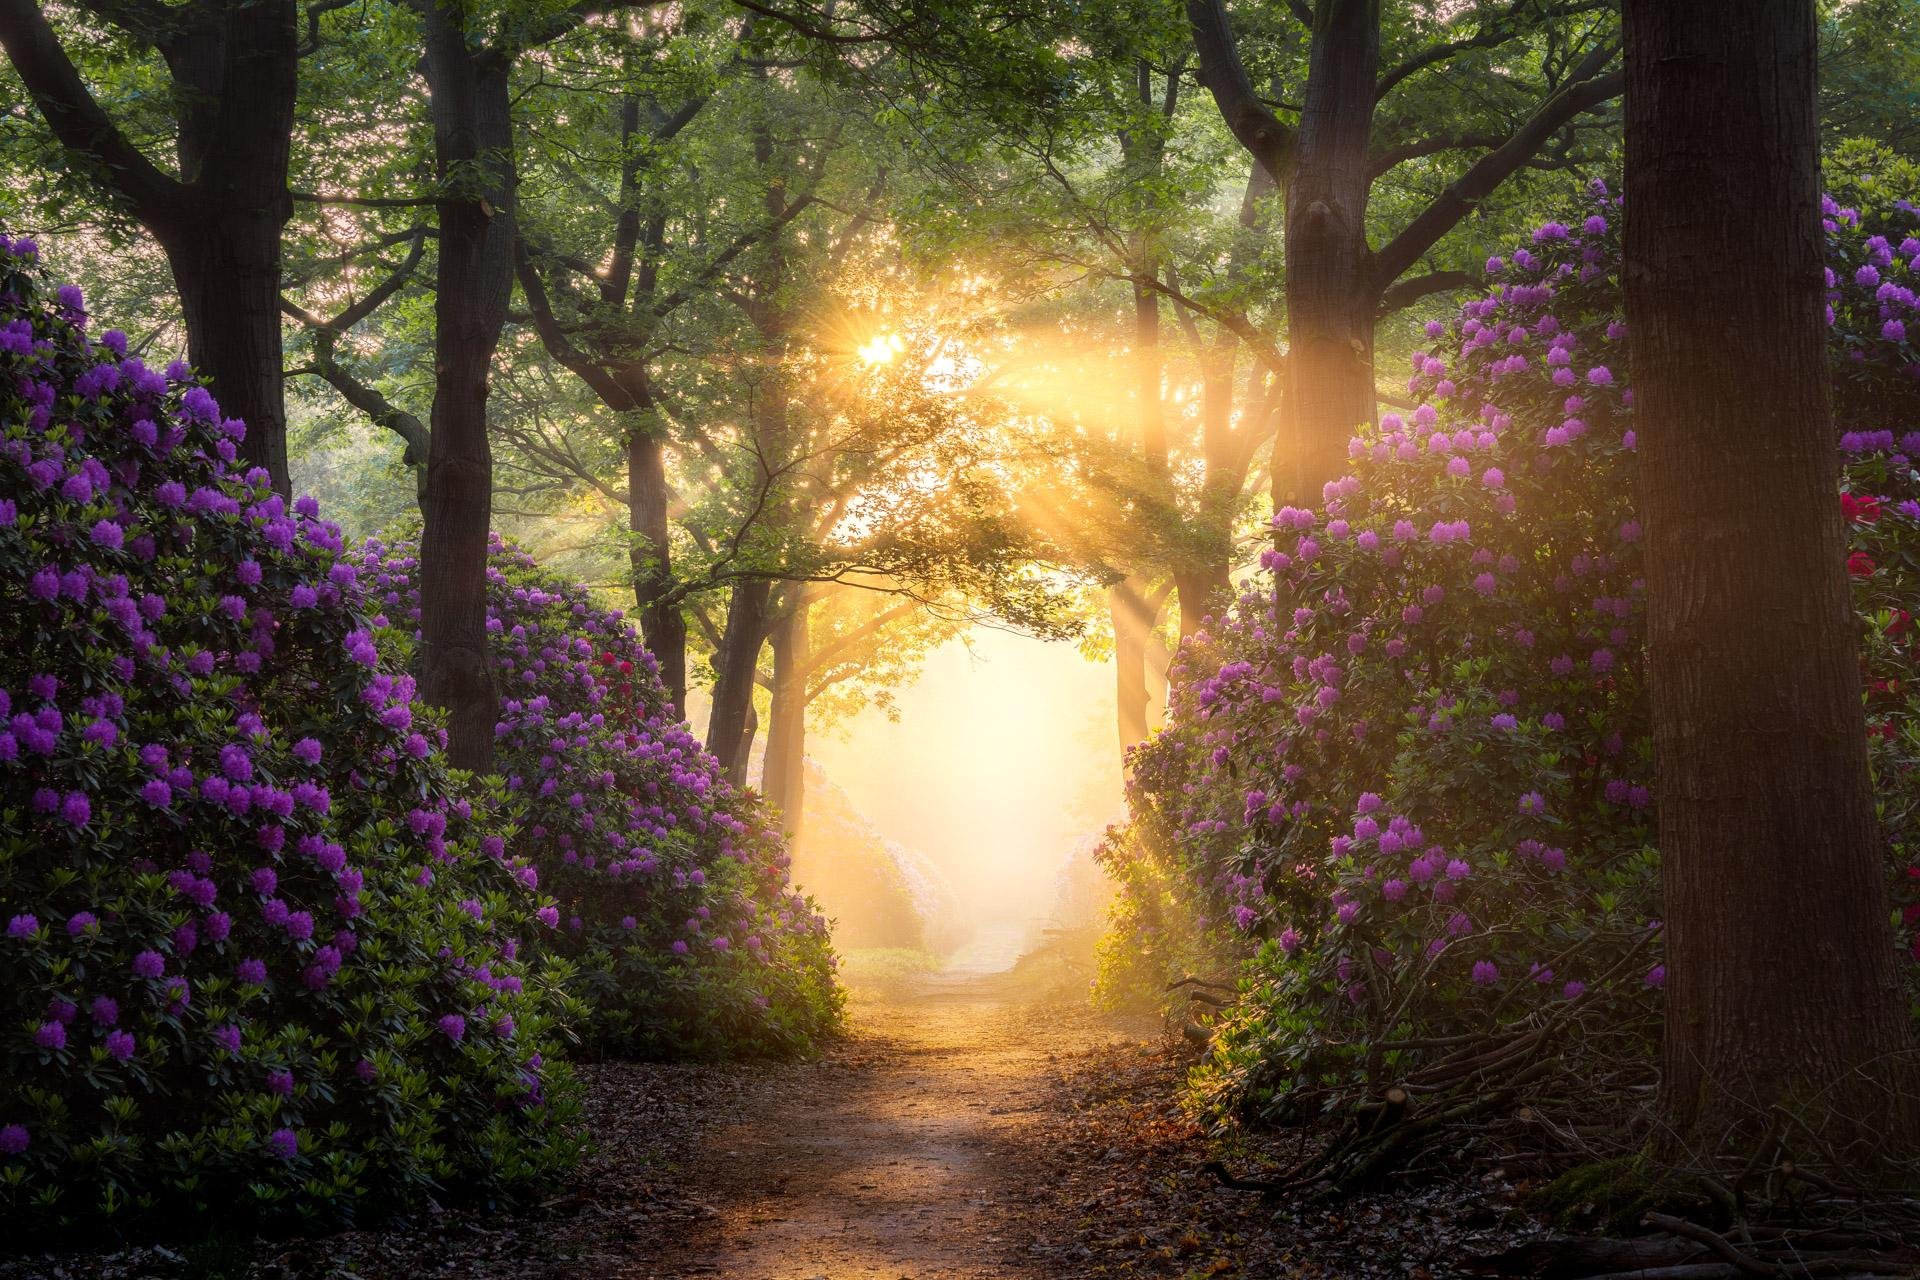 Rhododendron Flowers Walkway Path Sunlight Trees Plants Dirt Nature Netherlands 1920x1280